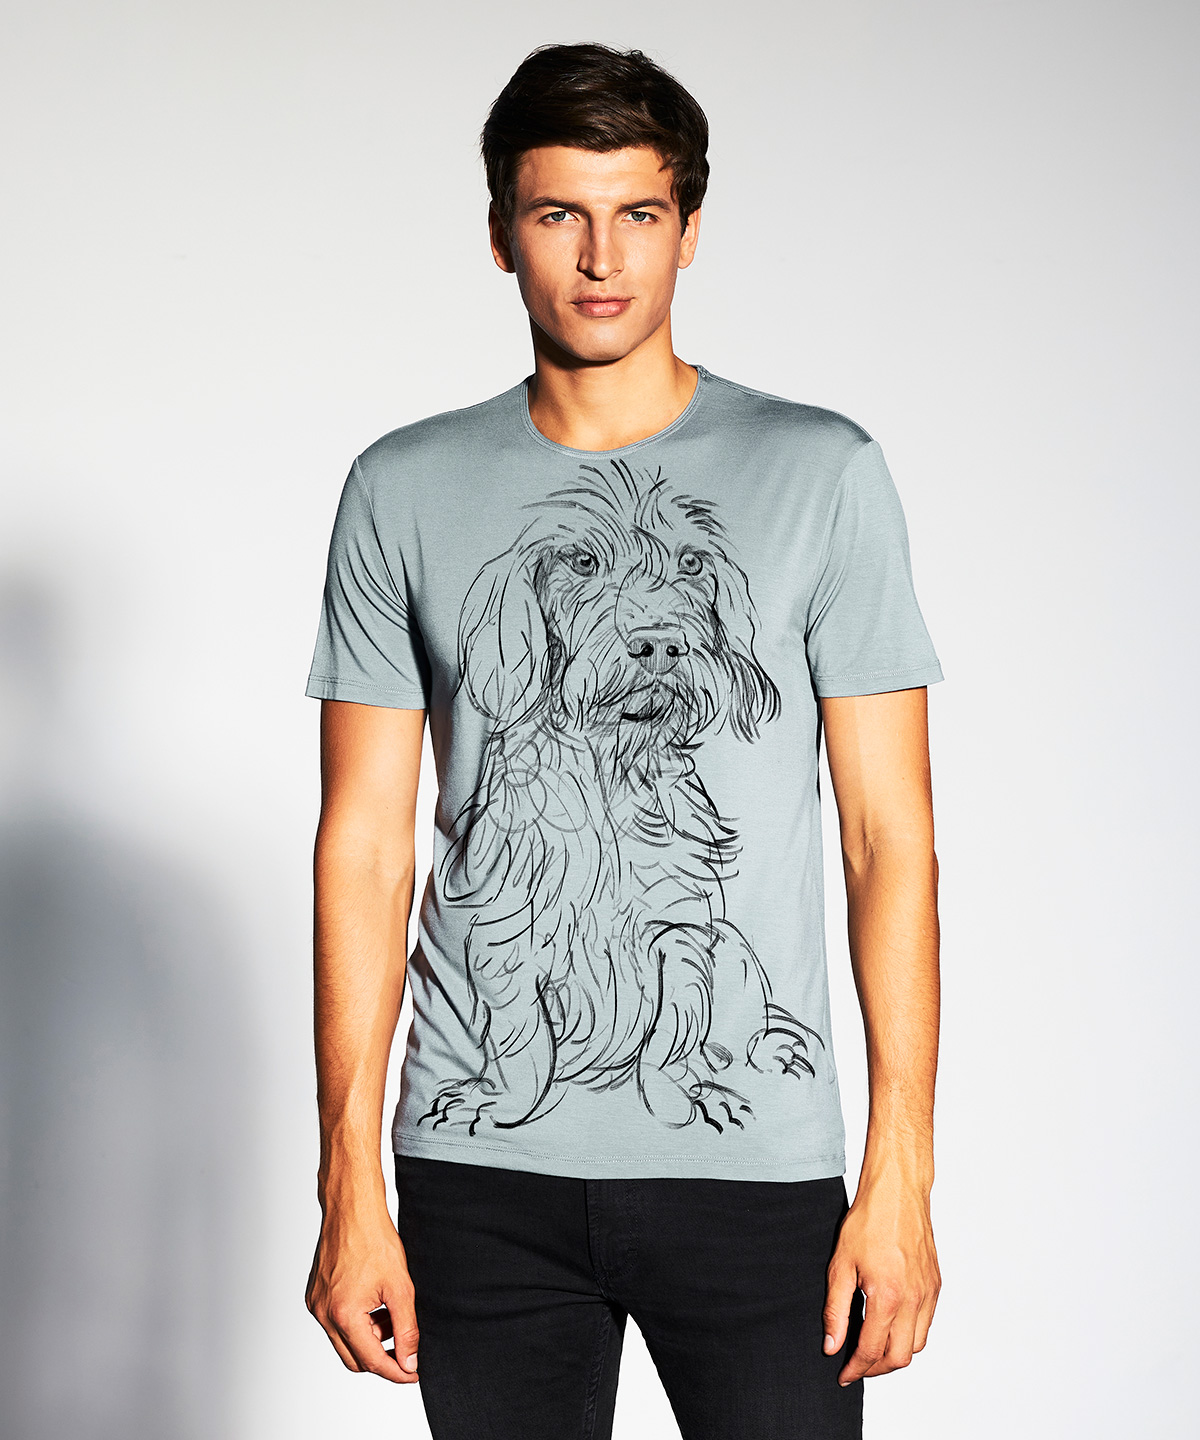 Wirehaired Dachshund storm cloud t-shirt MAN